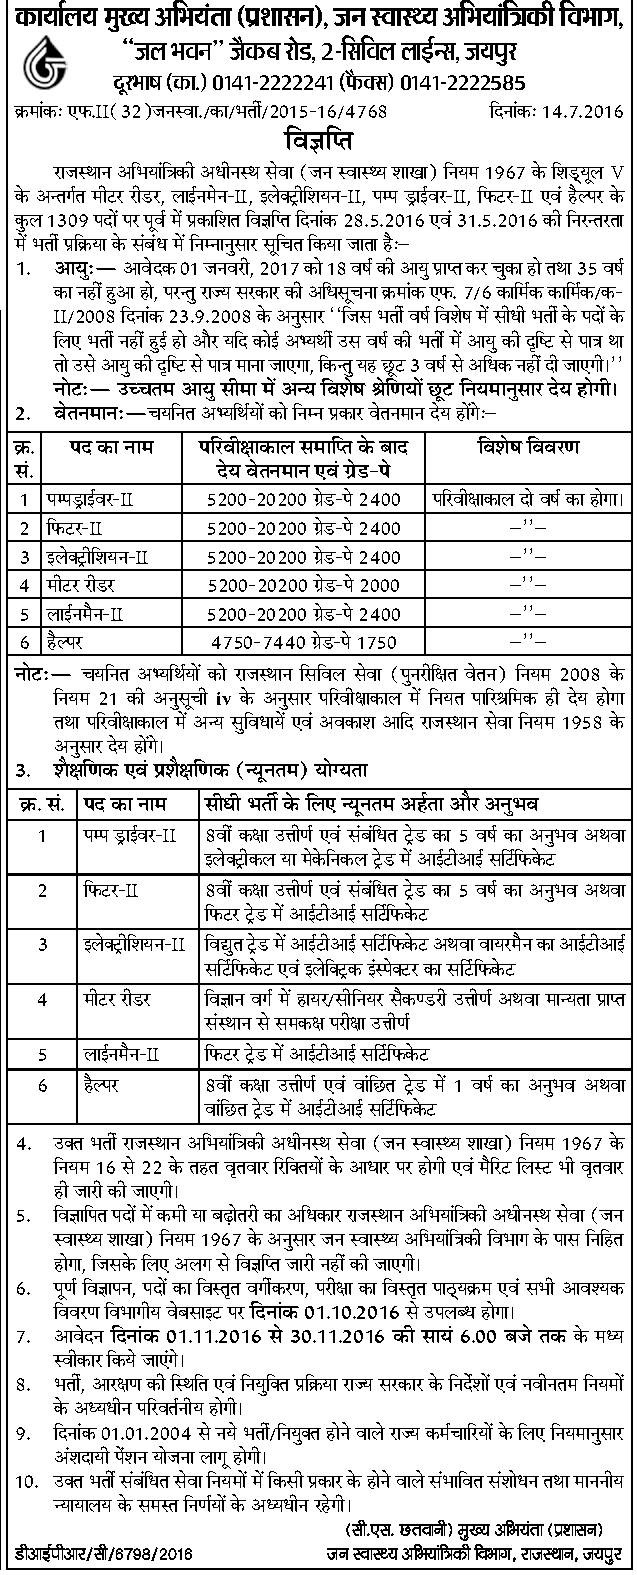 Rajasthan-PHED-Recruitment-Revised-Notification